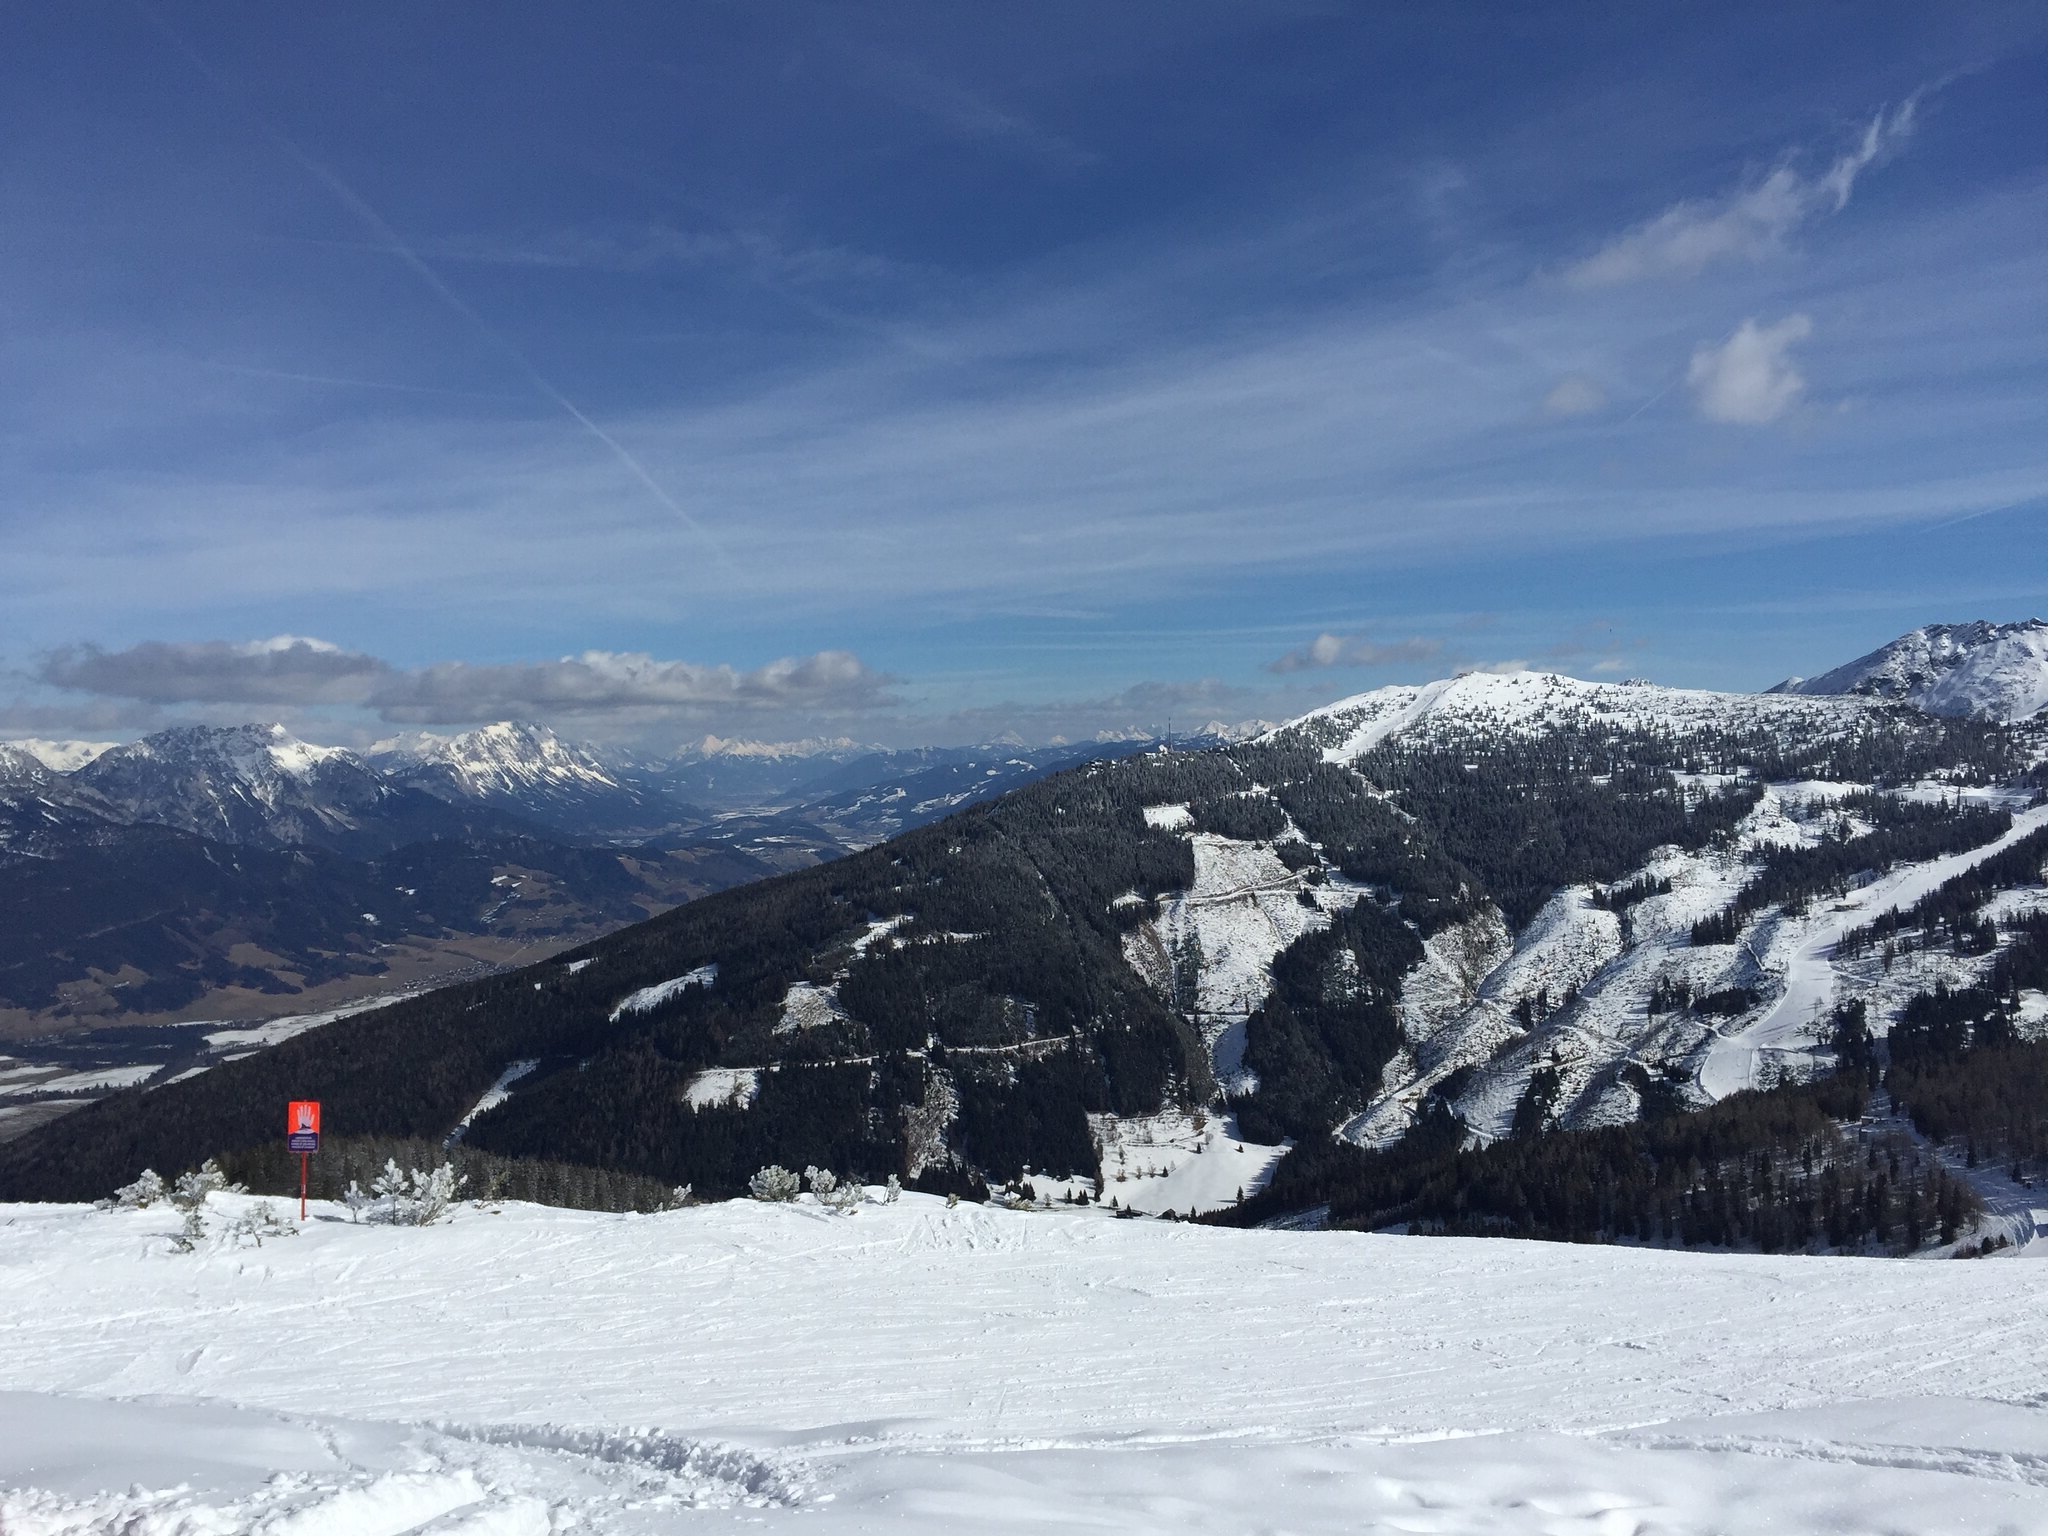 Skiing in Schladming